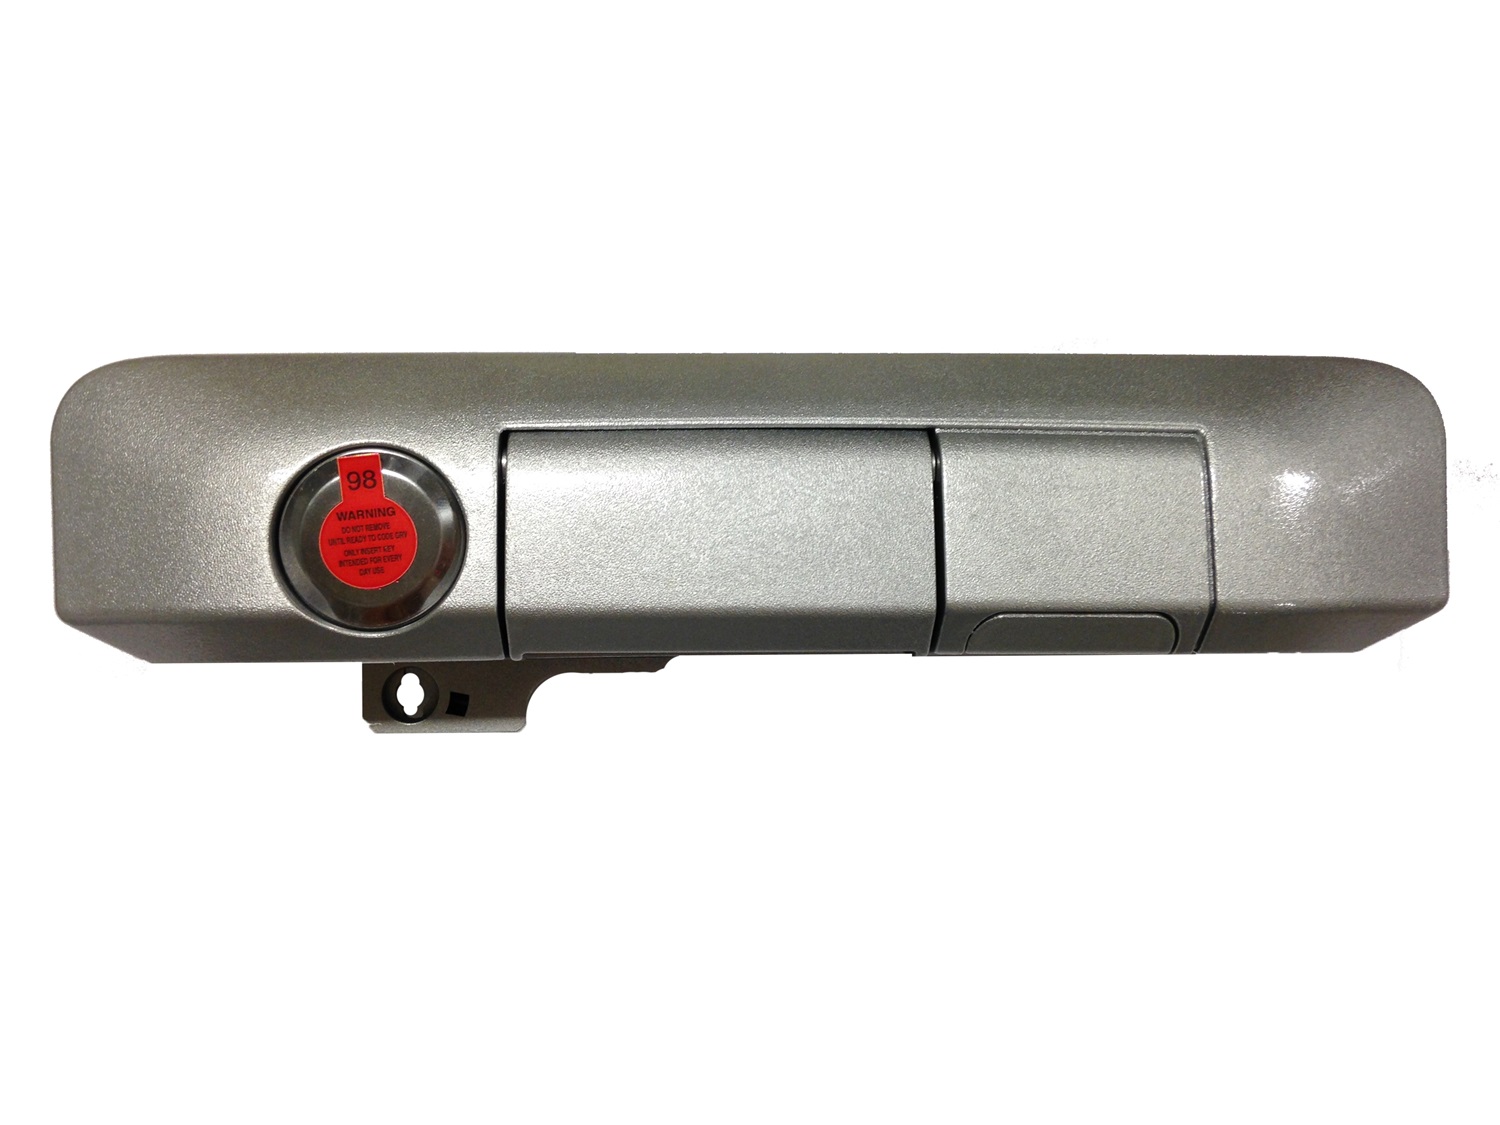 Pop and Lock PL5405 Manual Tailgate Lock Fits 05-15 Tacoma